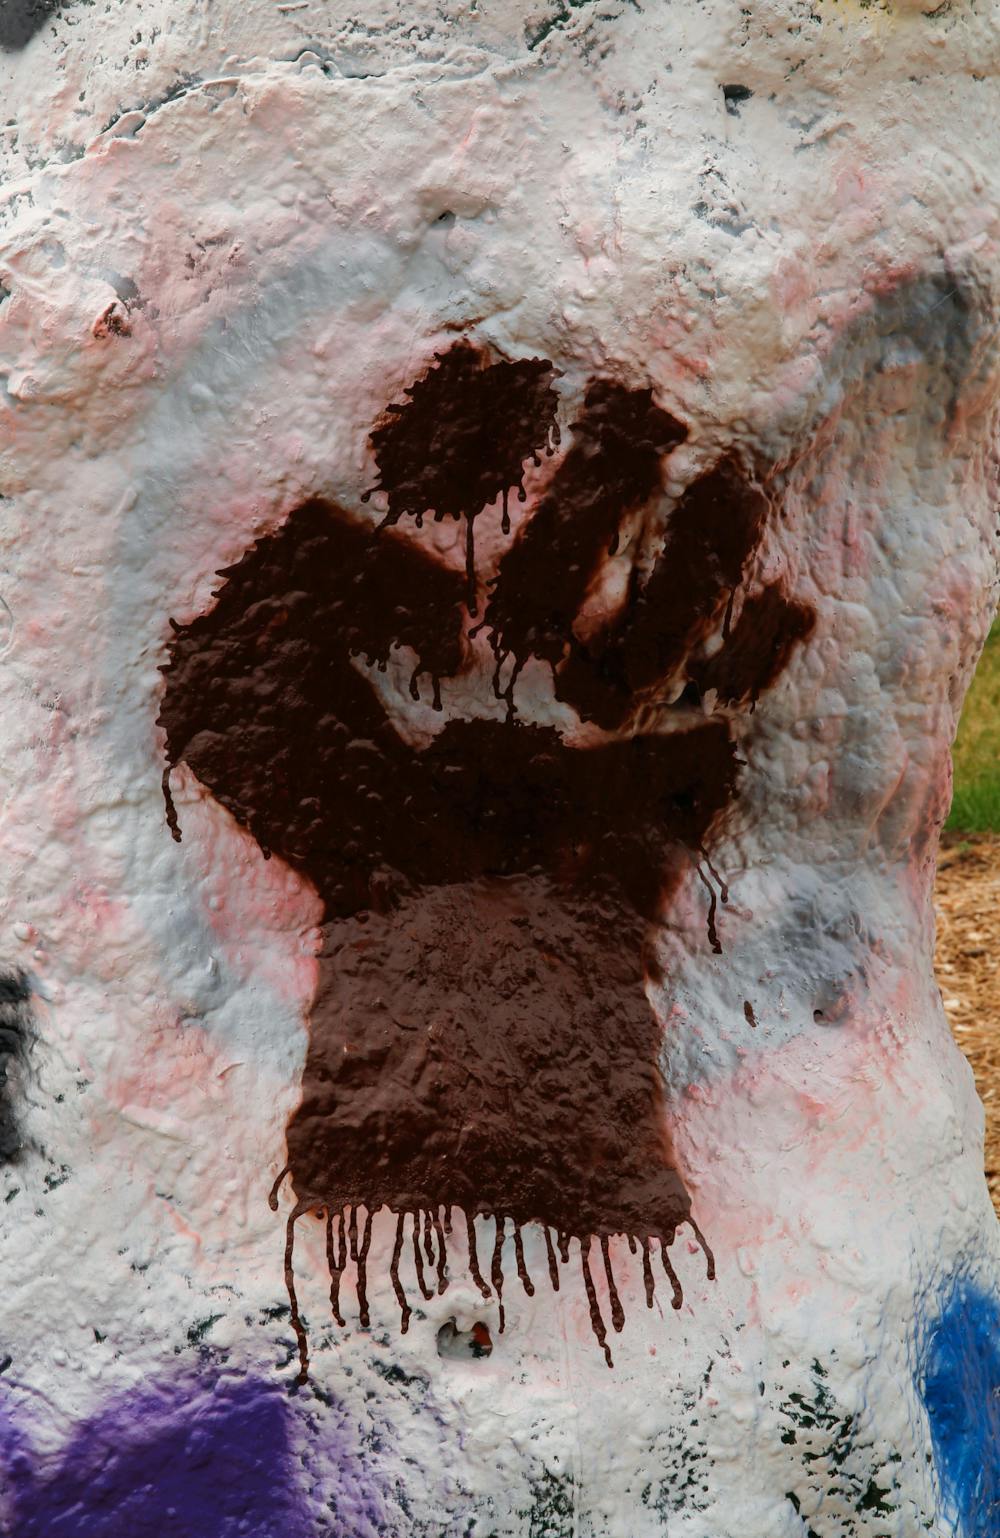 <p>The Rock on Farm Lane dawned other insignias like the Black Lives Matter fist. This represents not just people of color within the LGBTQ+ community, but also solidarity with the Black Lives Matter movement.  Photographed on  June 7, 2021.</p>